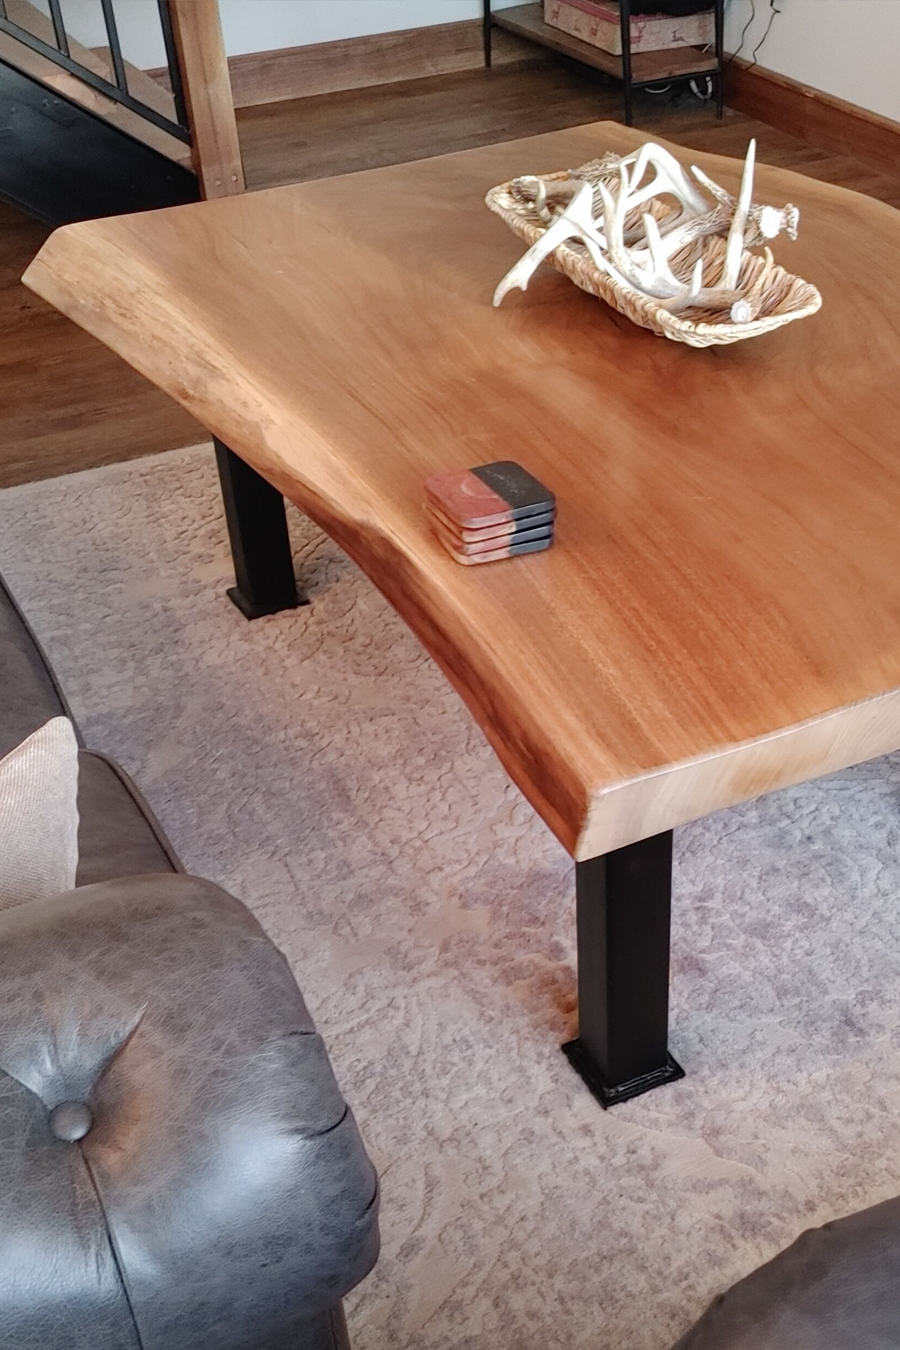 Cleaning Live Edge Tables | Live Edge Refined